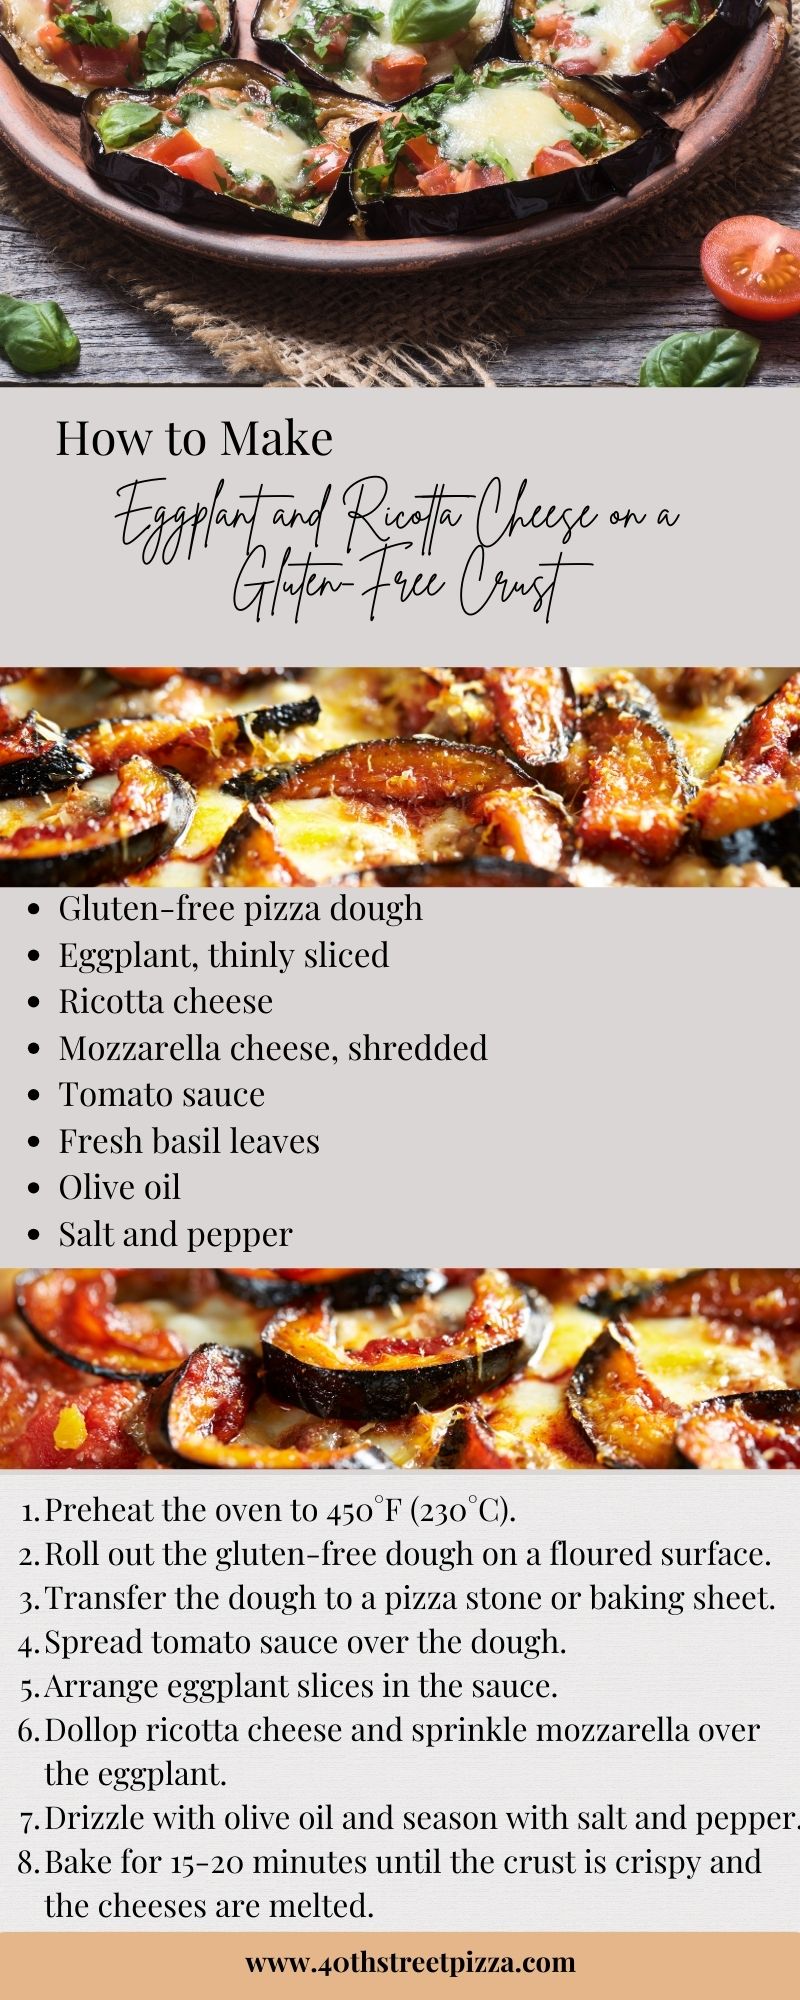 Eggplant and Ricotta Cheese on a Gluten-Free Crust infographic